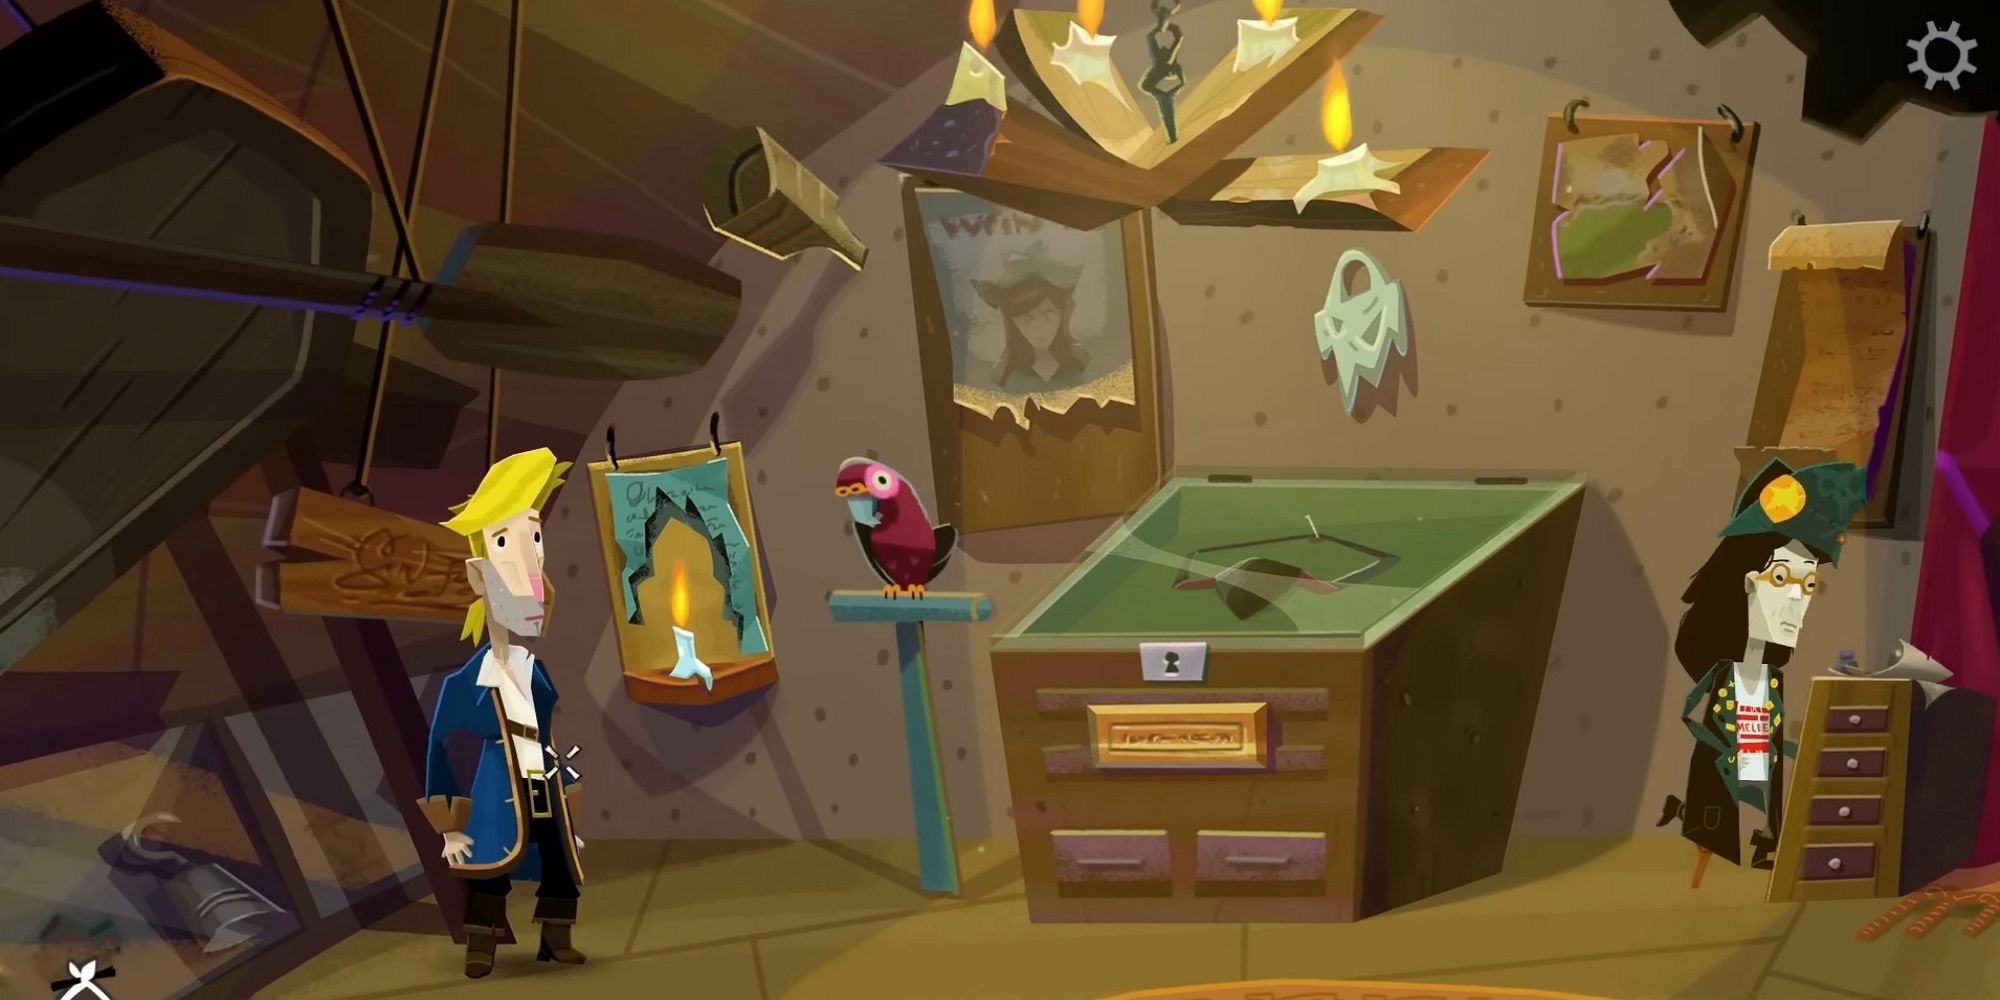 Guybrush Threepwood, The Eye Patch, the Parrot, and the Curator in Return to Monkey Island